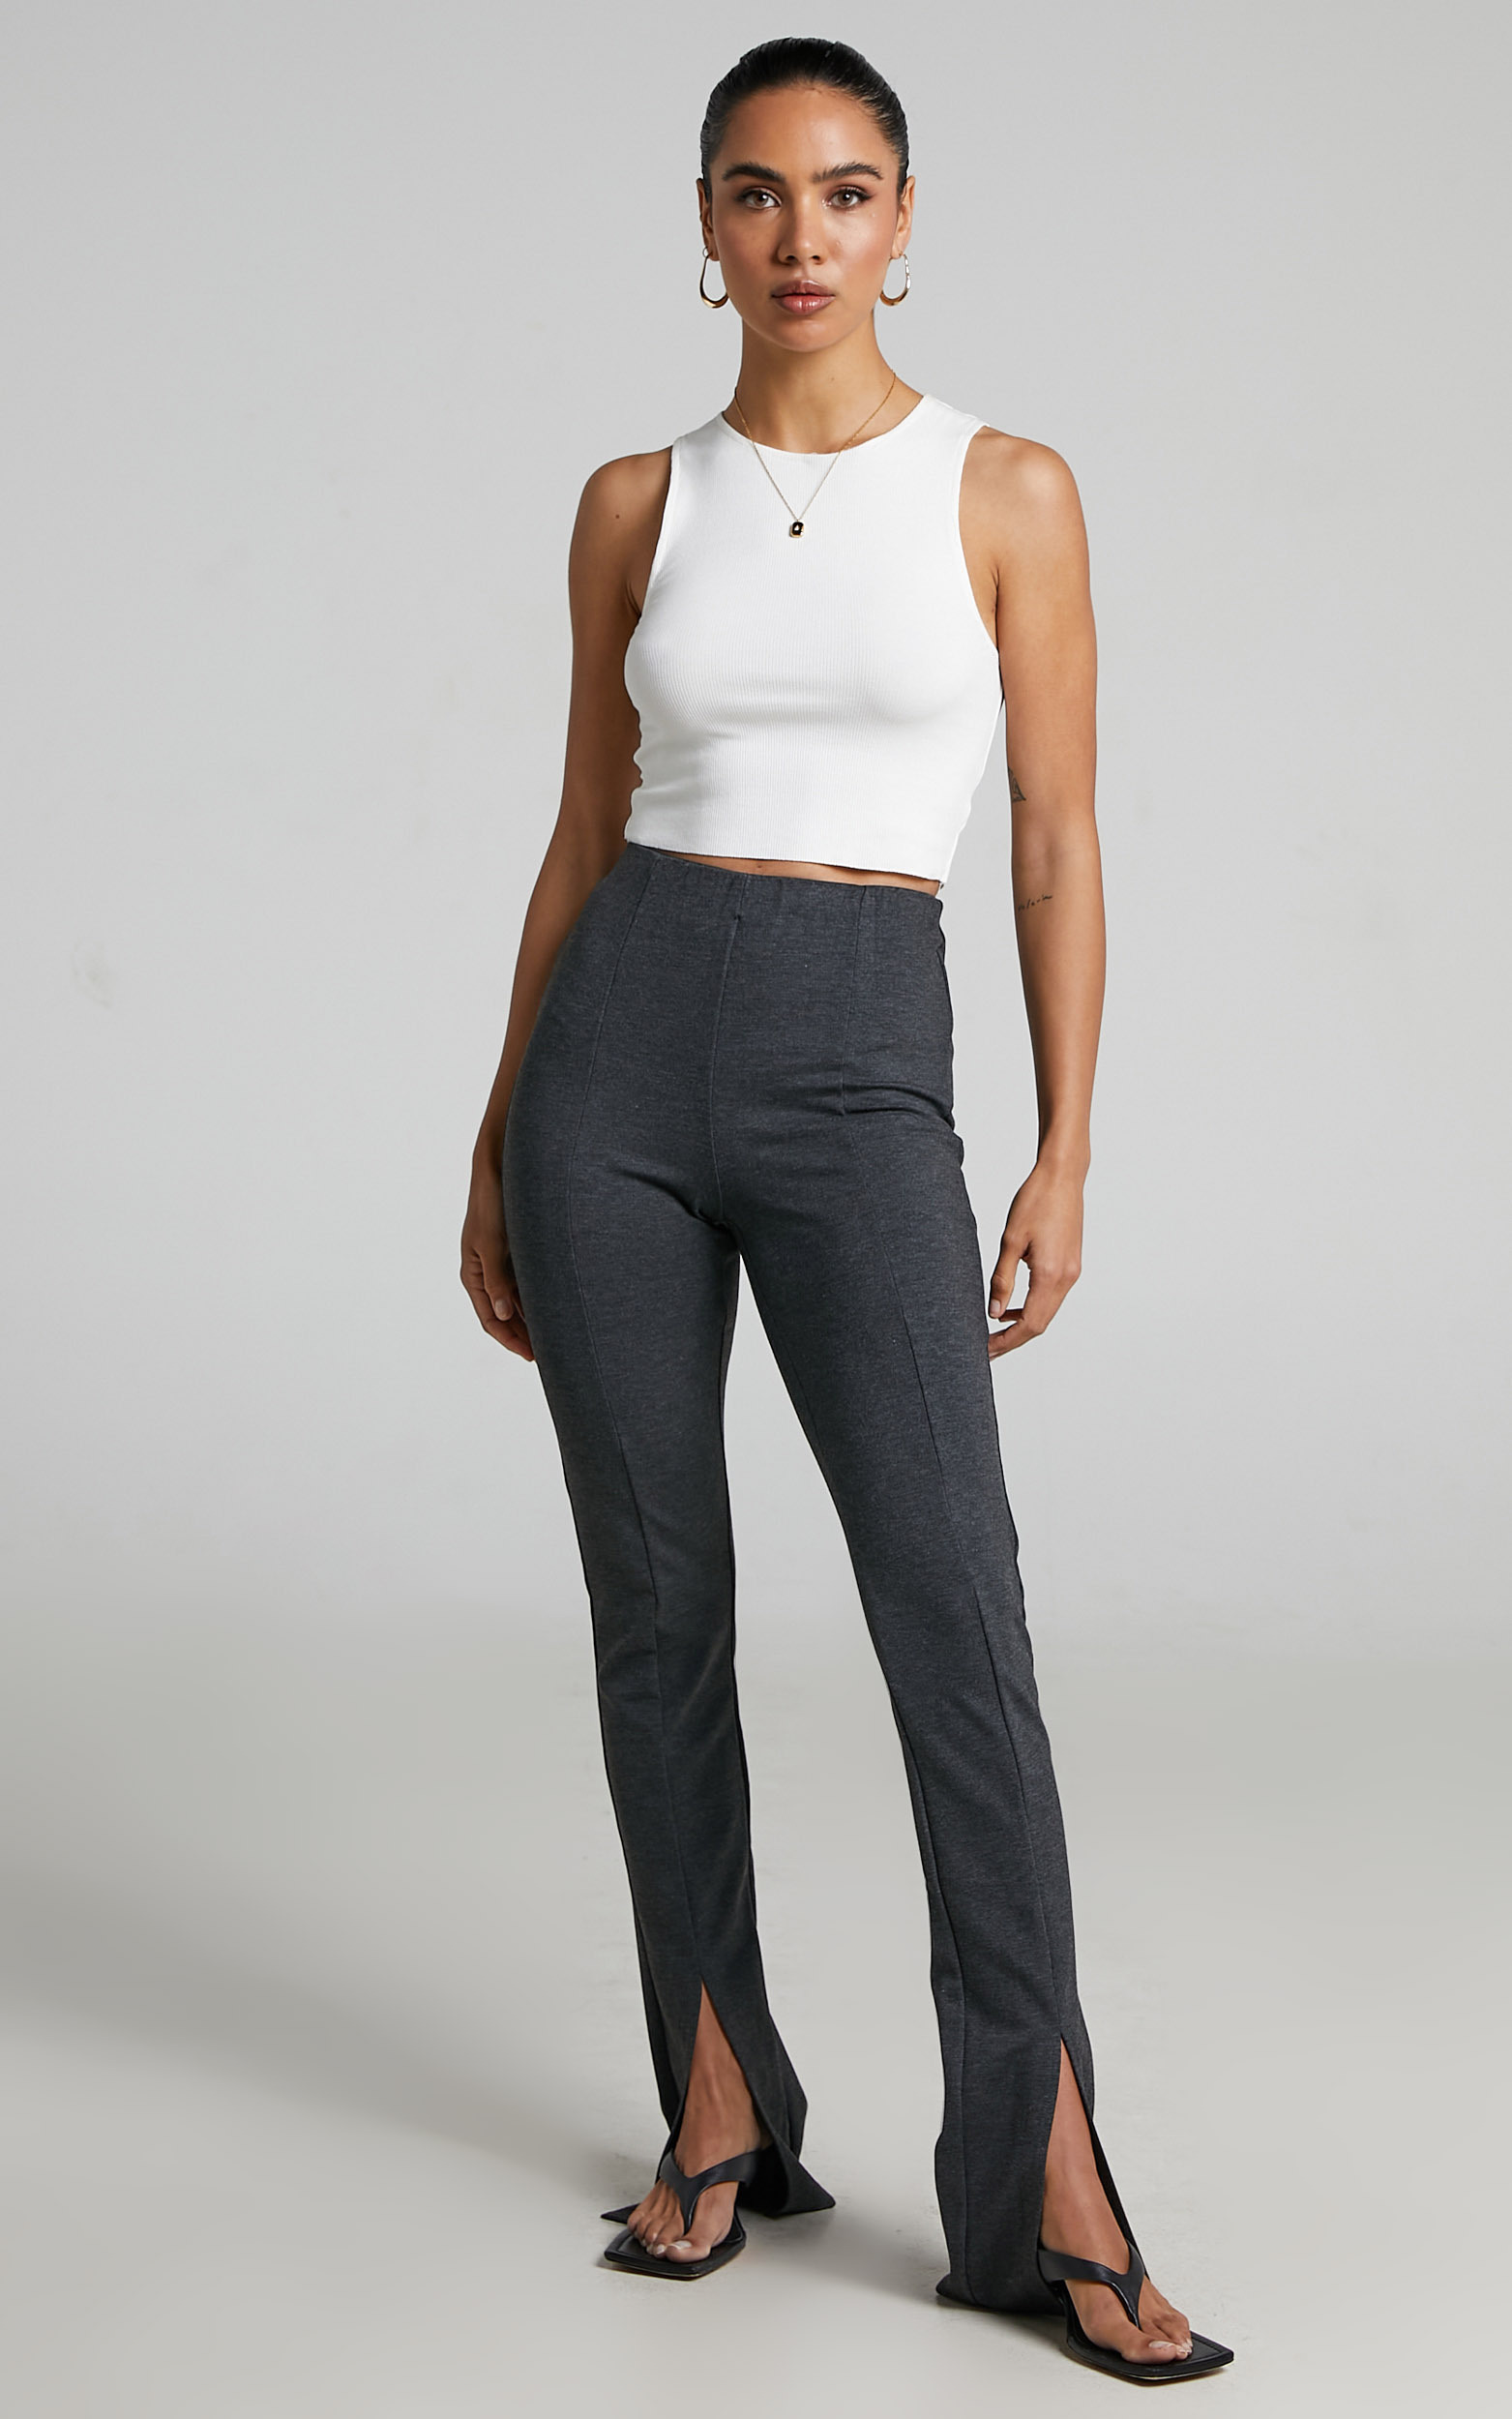 4th & Reckless - Eira Legging in Dark Grey - 06, GRY1, hi-res image number null